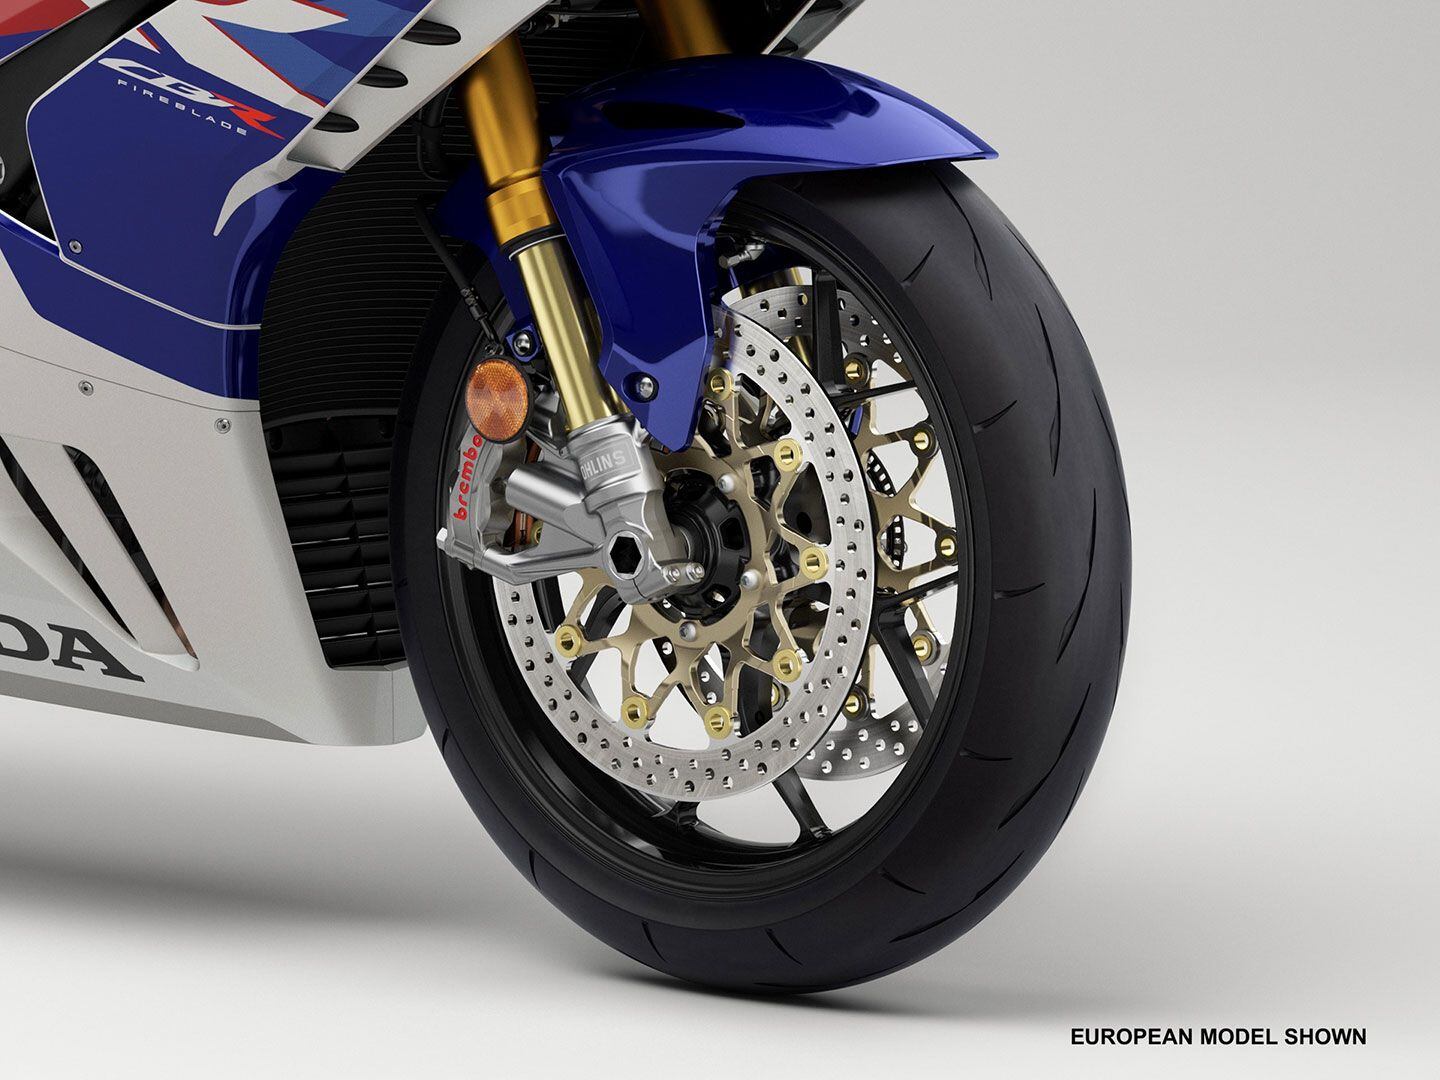 Honda gives the people what they want with top-shelf components from Brembo and Öhlins.